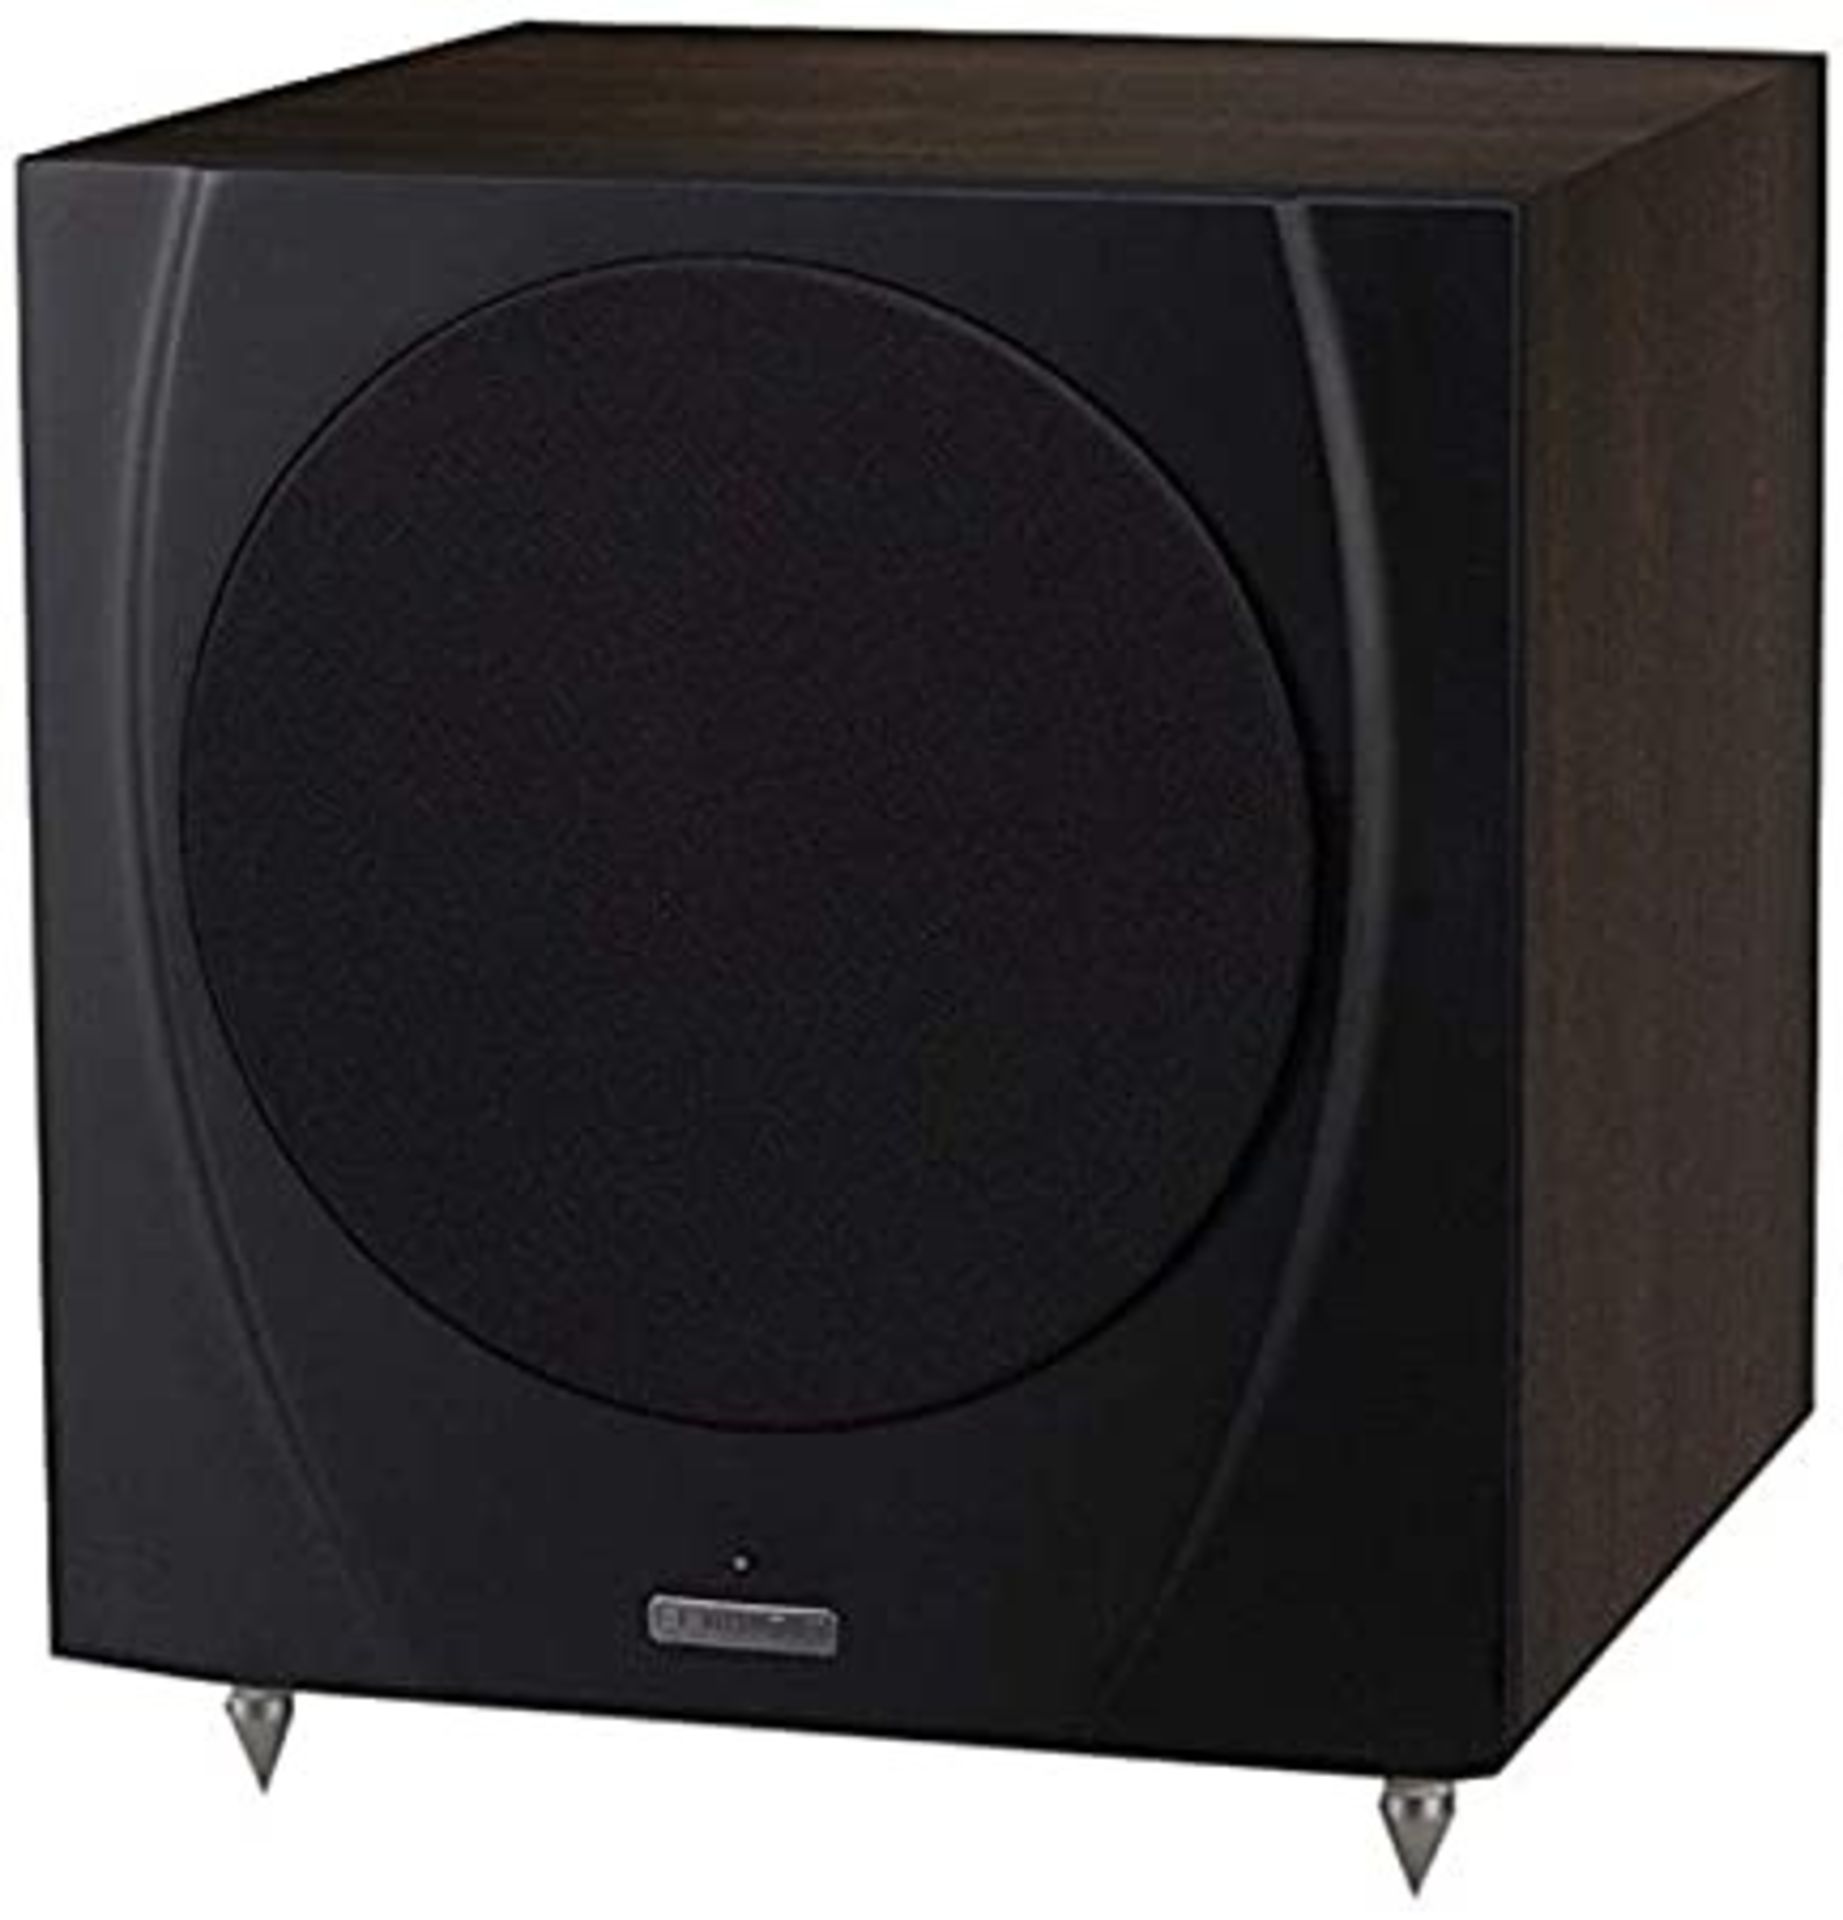 BOXED MISSION MS-400 SUBWOOFER WALNUT RRP £429.00